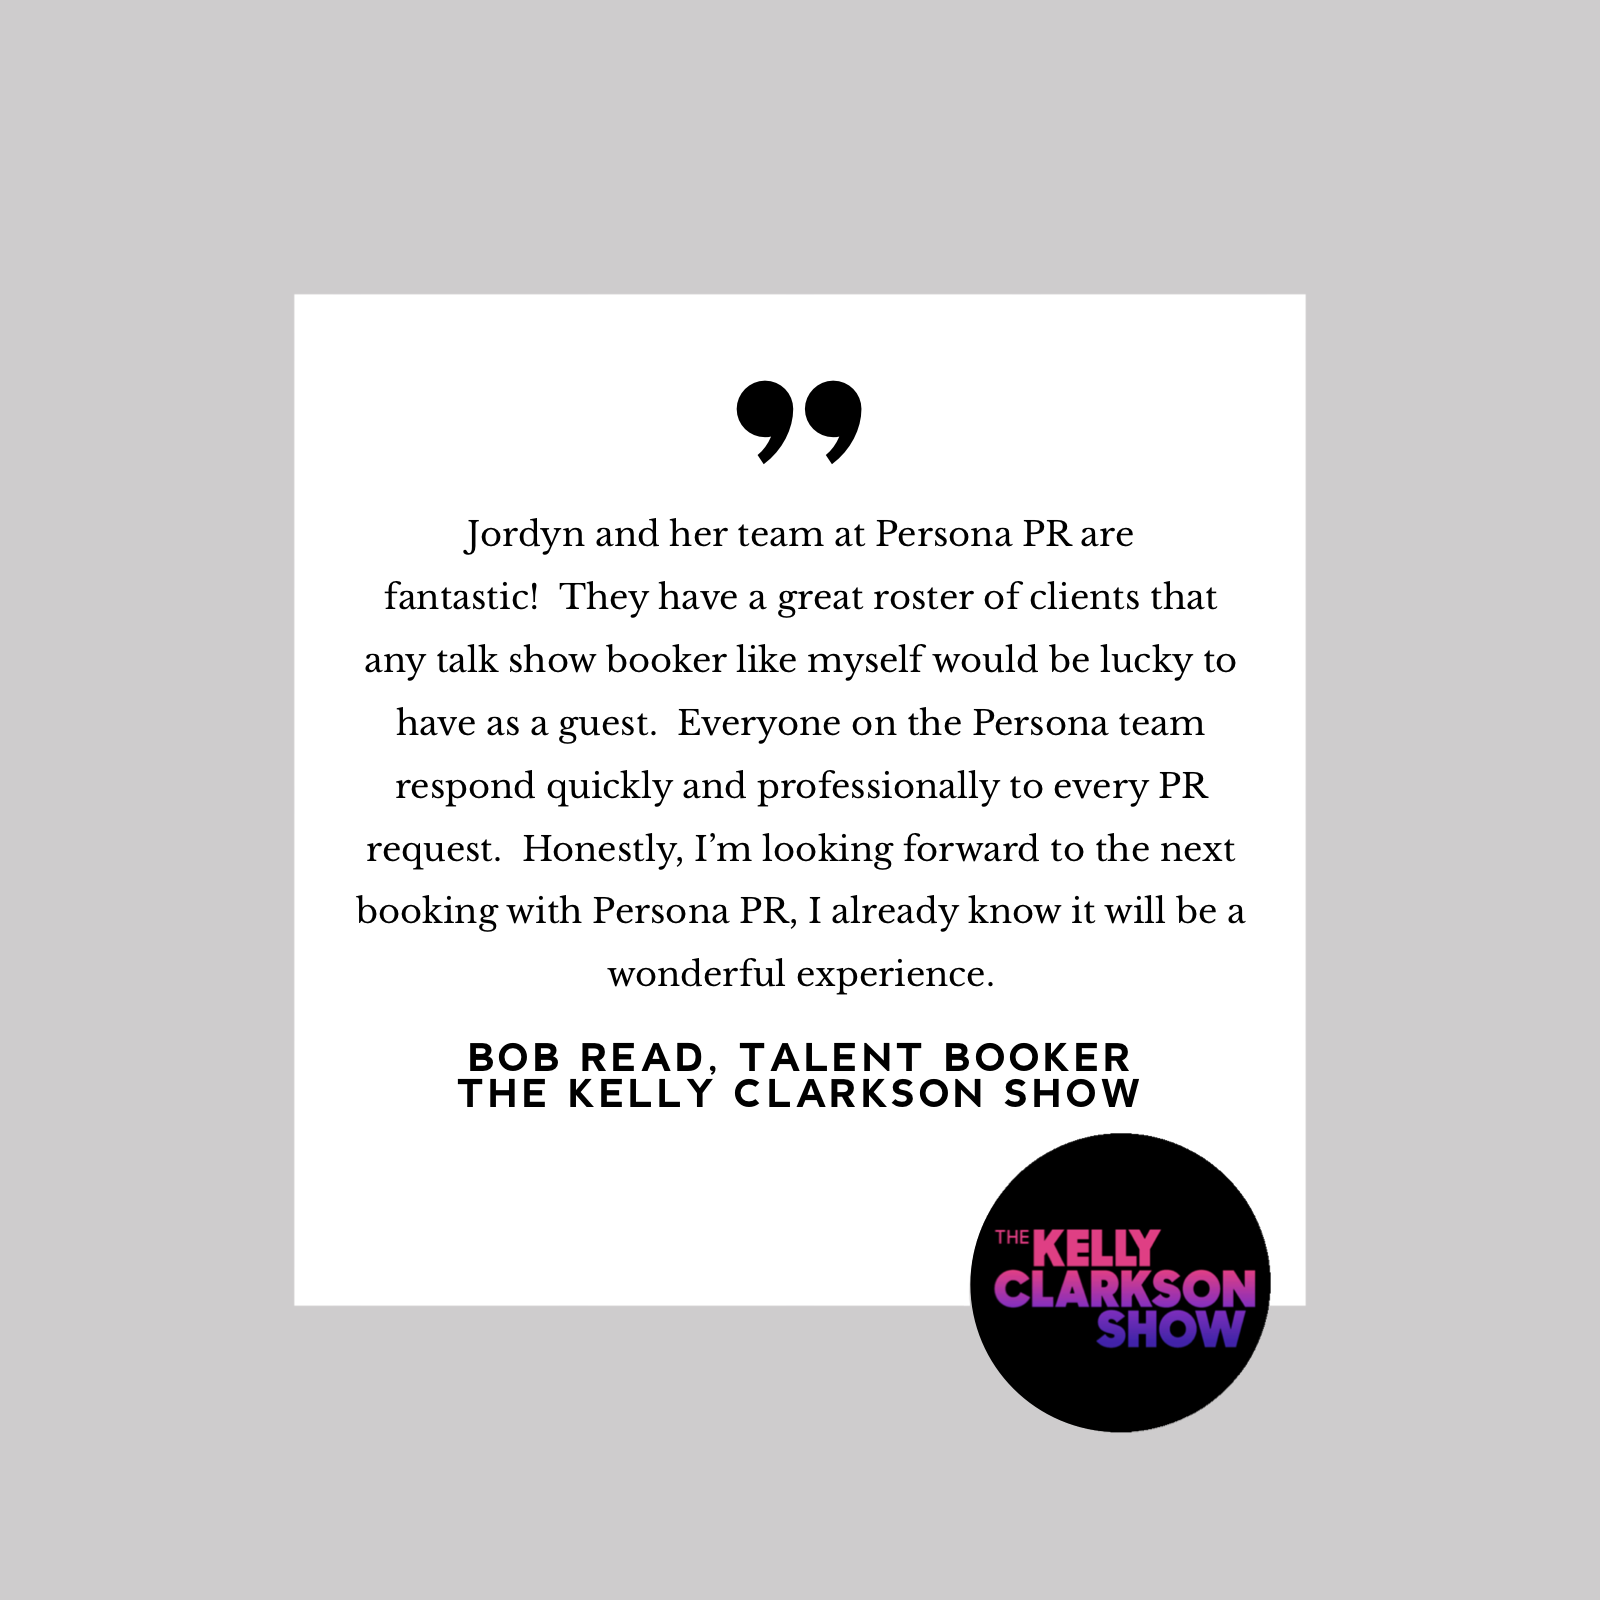 Testimonial from Bob Read, Talent Booker, The Kelly Clarkson Show